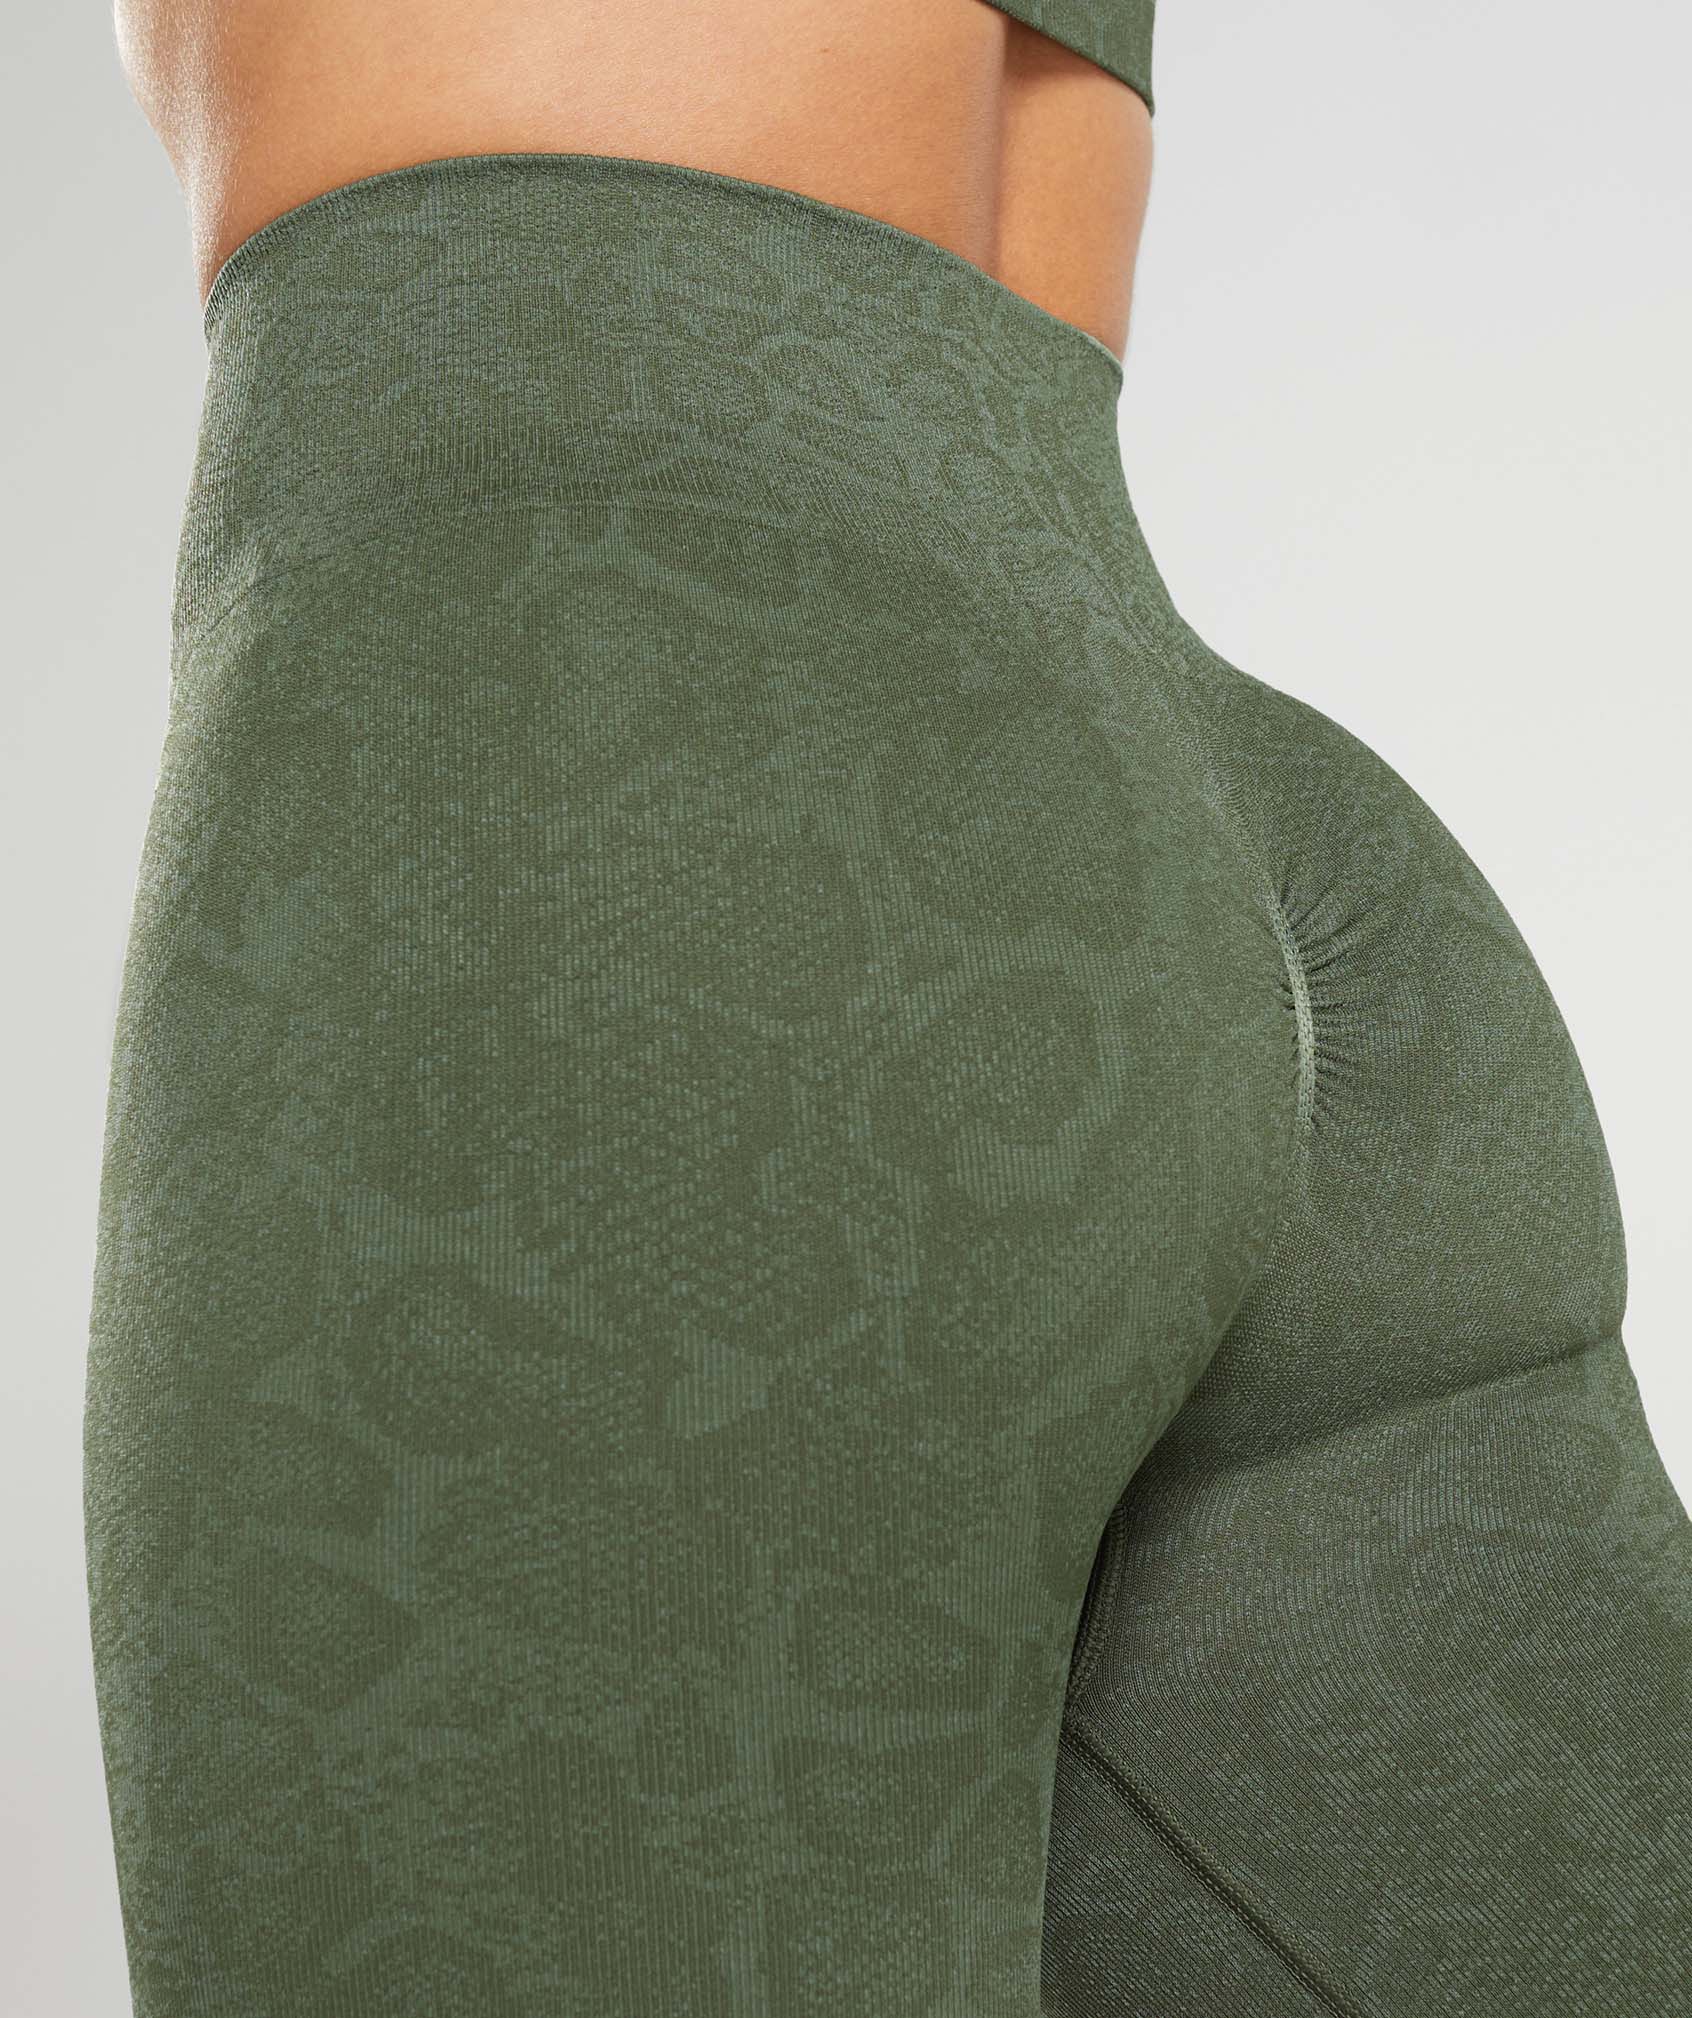 Adapt Animal Seamless Cycling Shorts in Willow Green/Core Olive - view 6